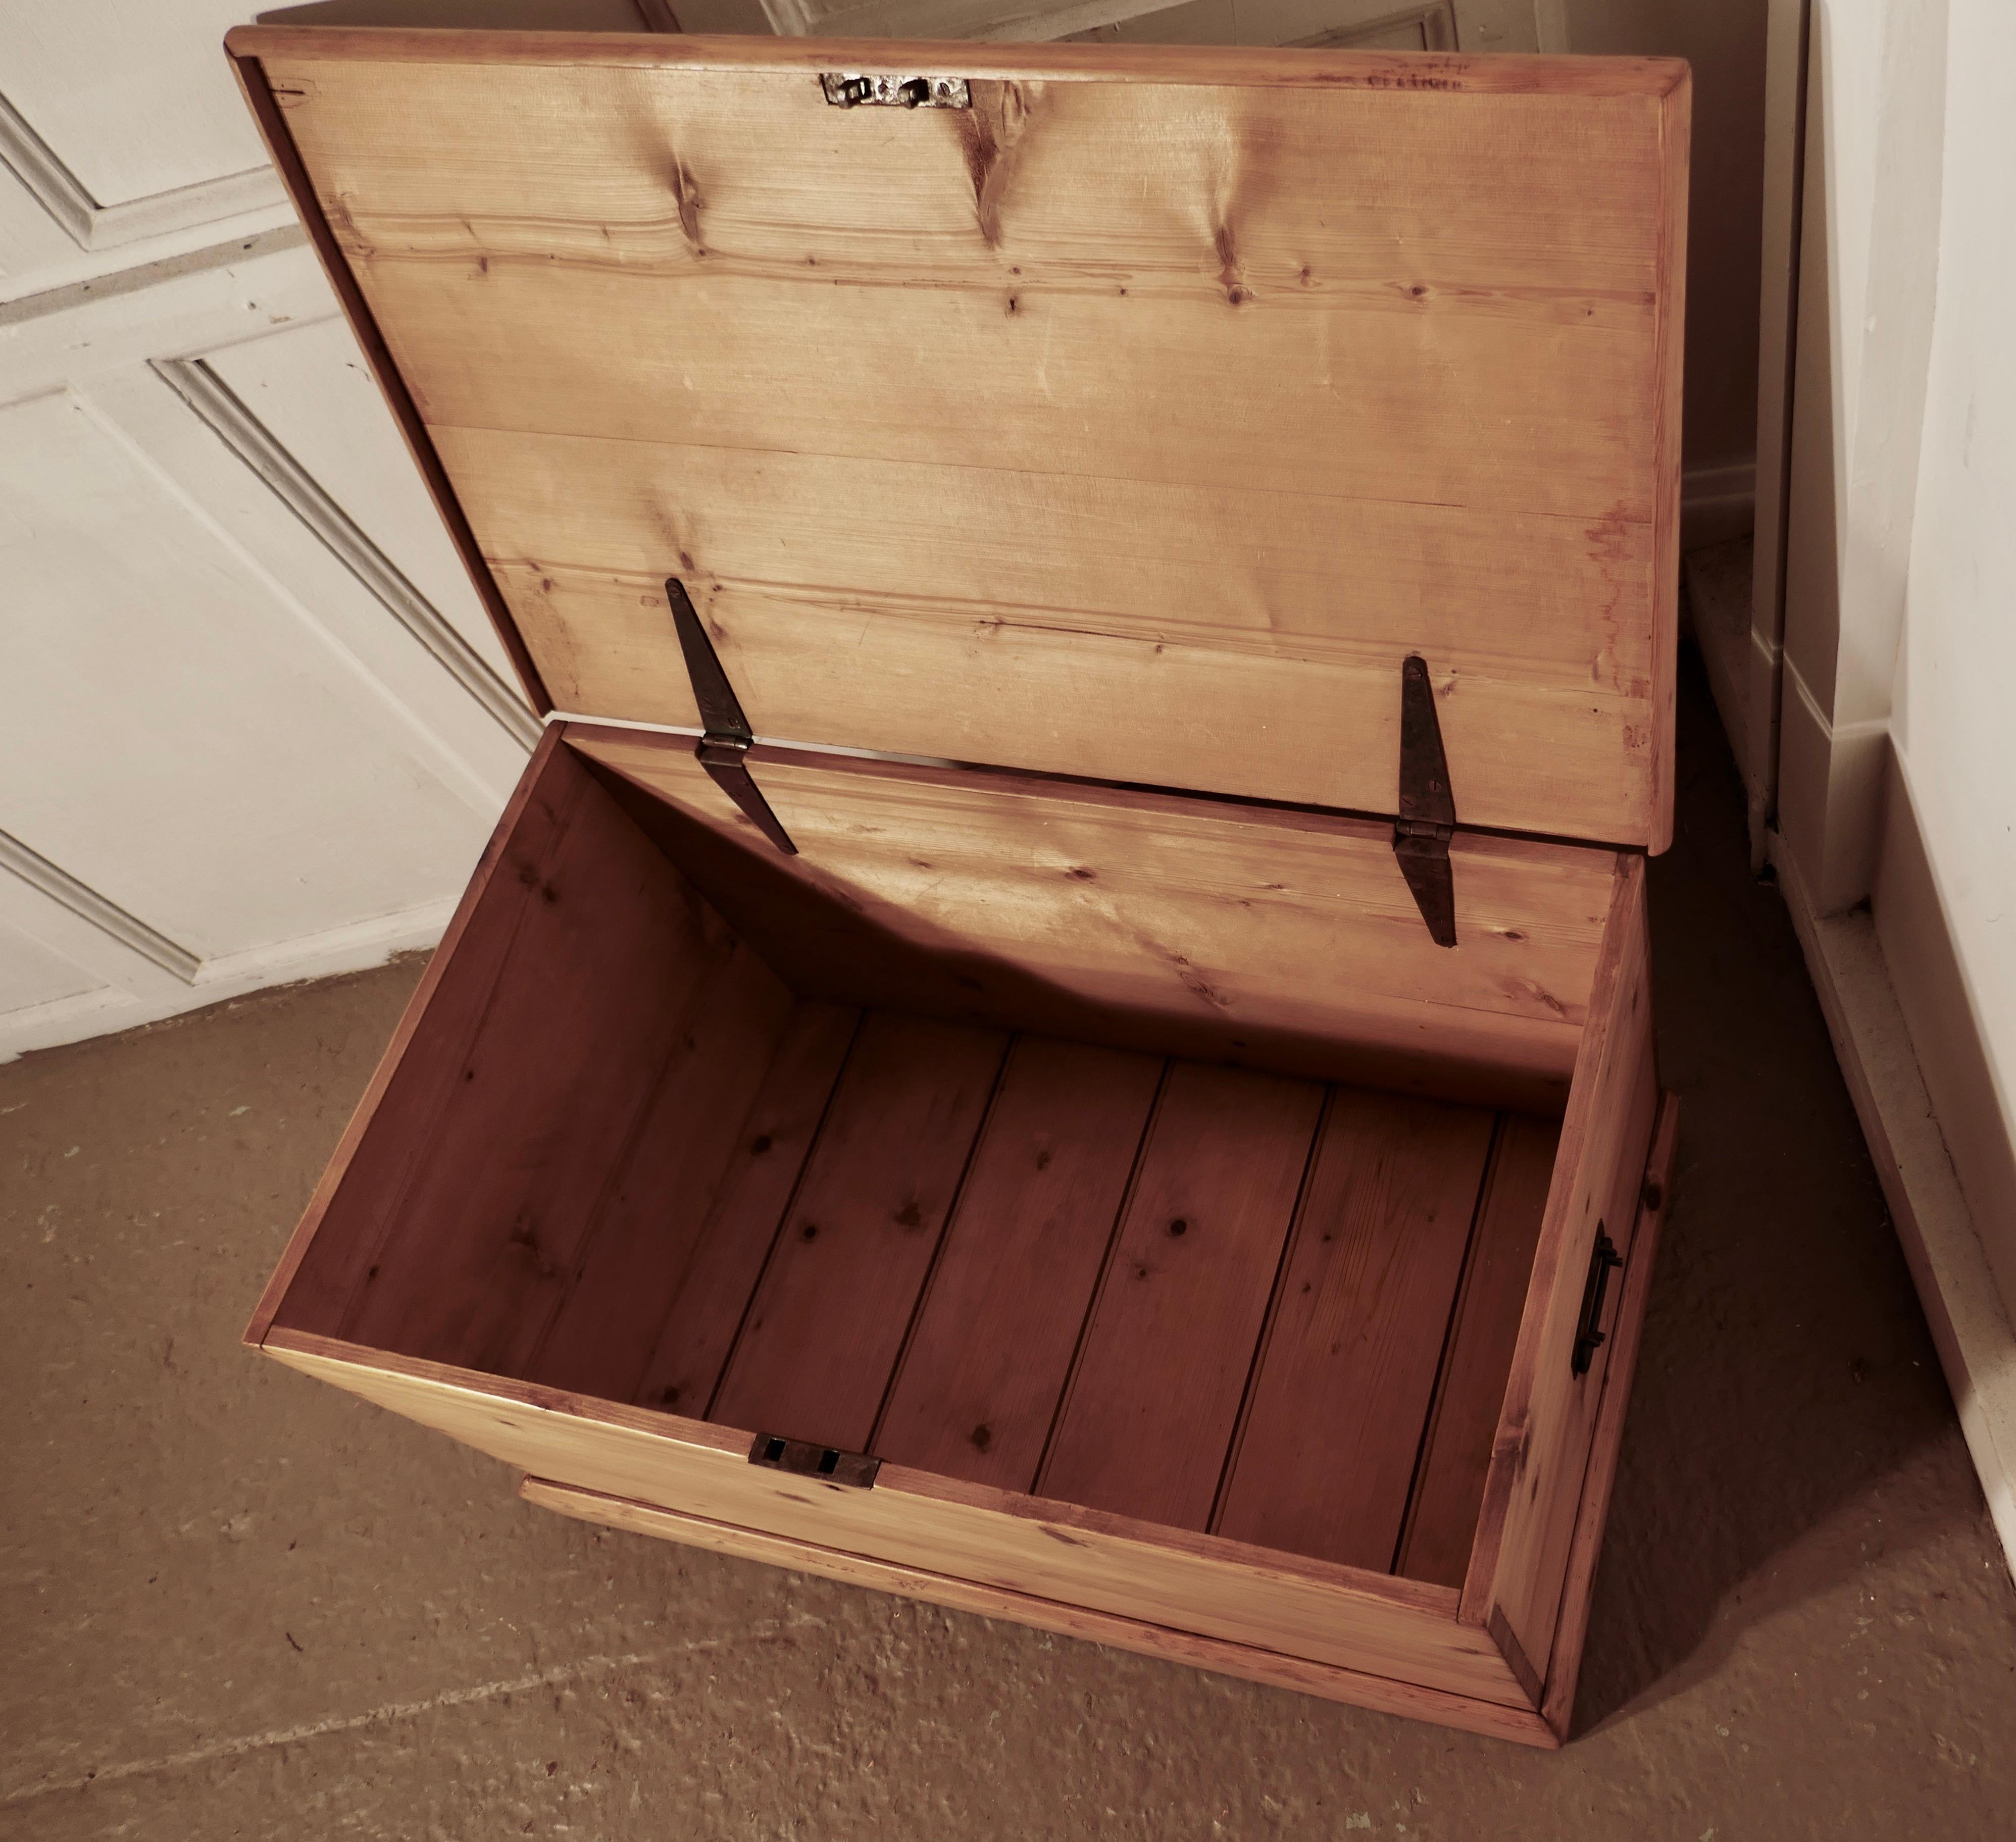 Large Victorian pine blanket box, coffee table or shoe tidy
 
A Roomy Victorian pine blanket box or coffee table
This is a good quality pine box it has been fully restored, it has iron carrying handles and it stands on a plinth
The chest very